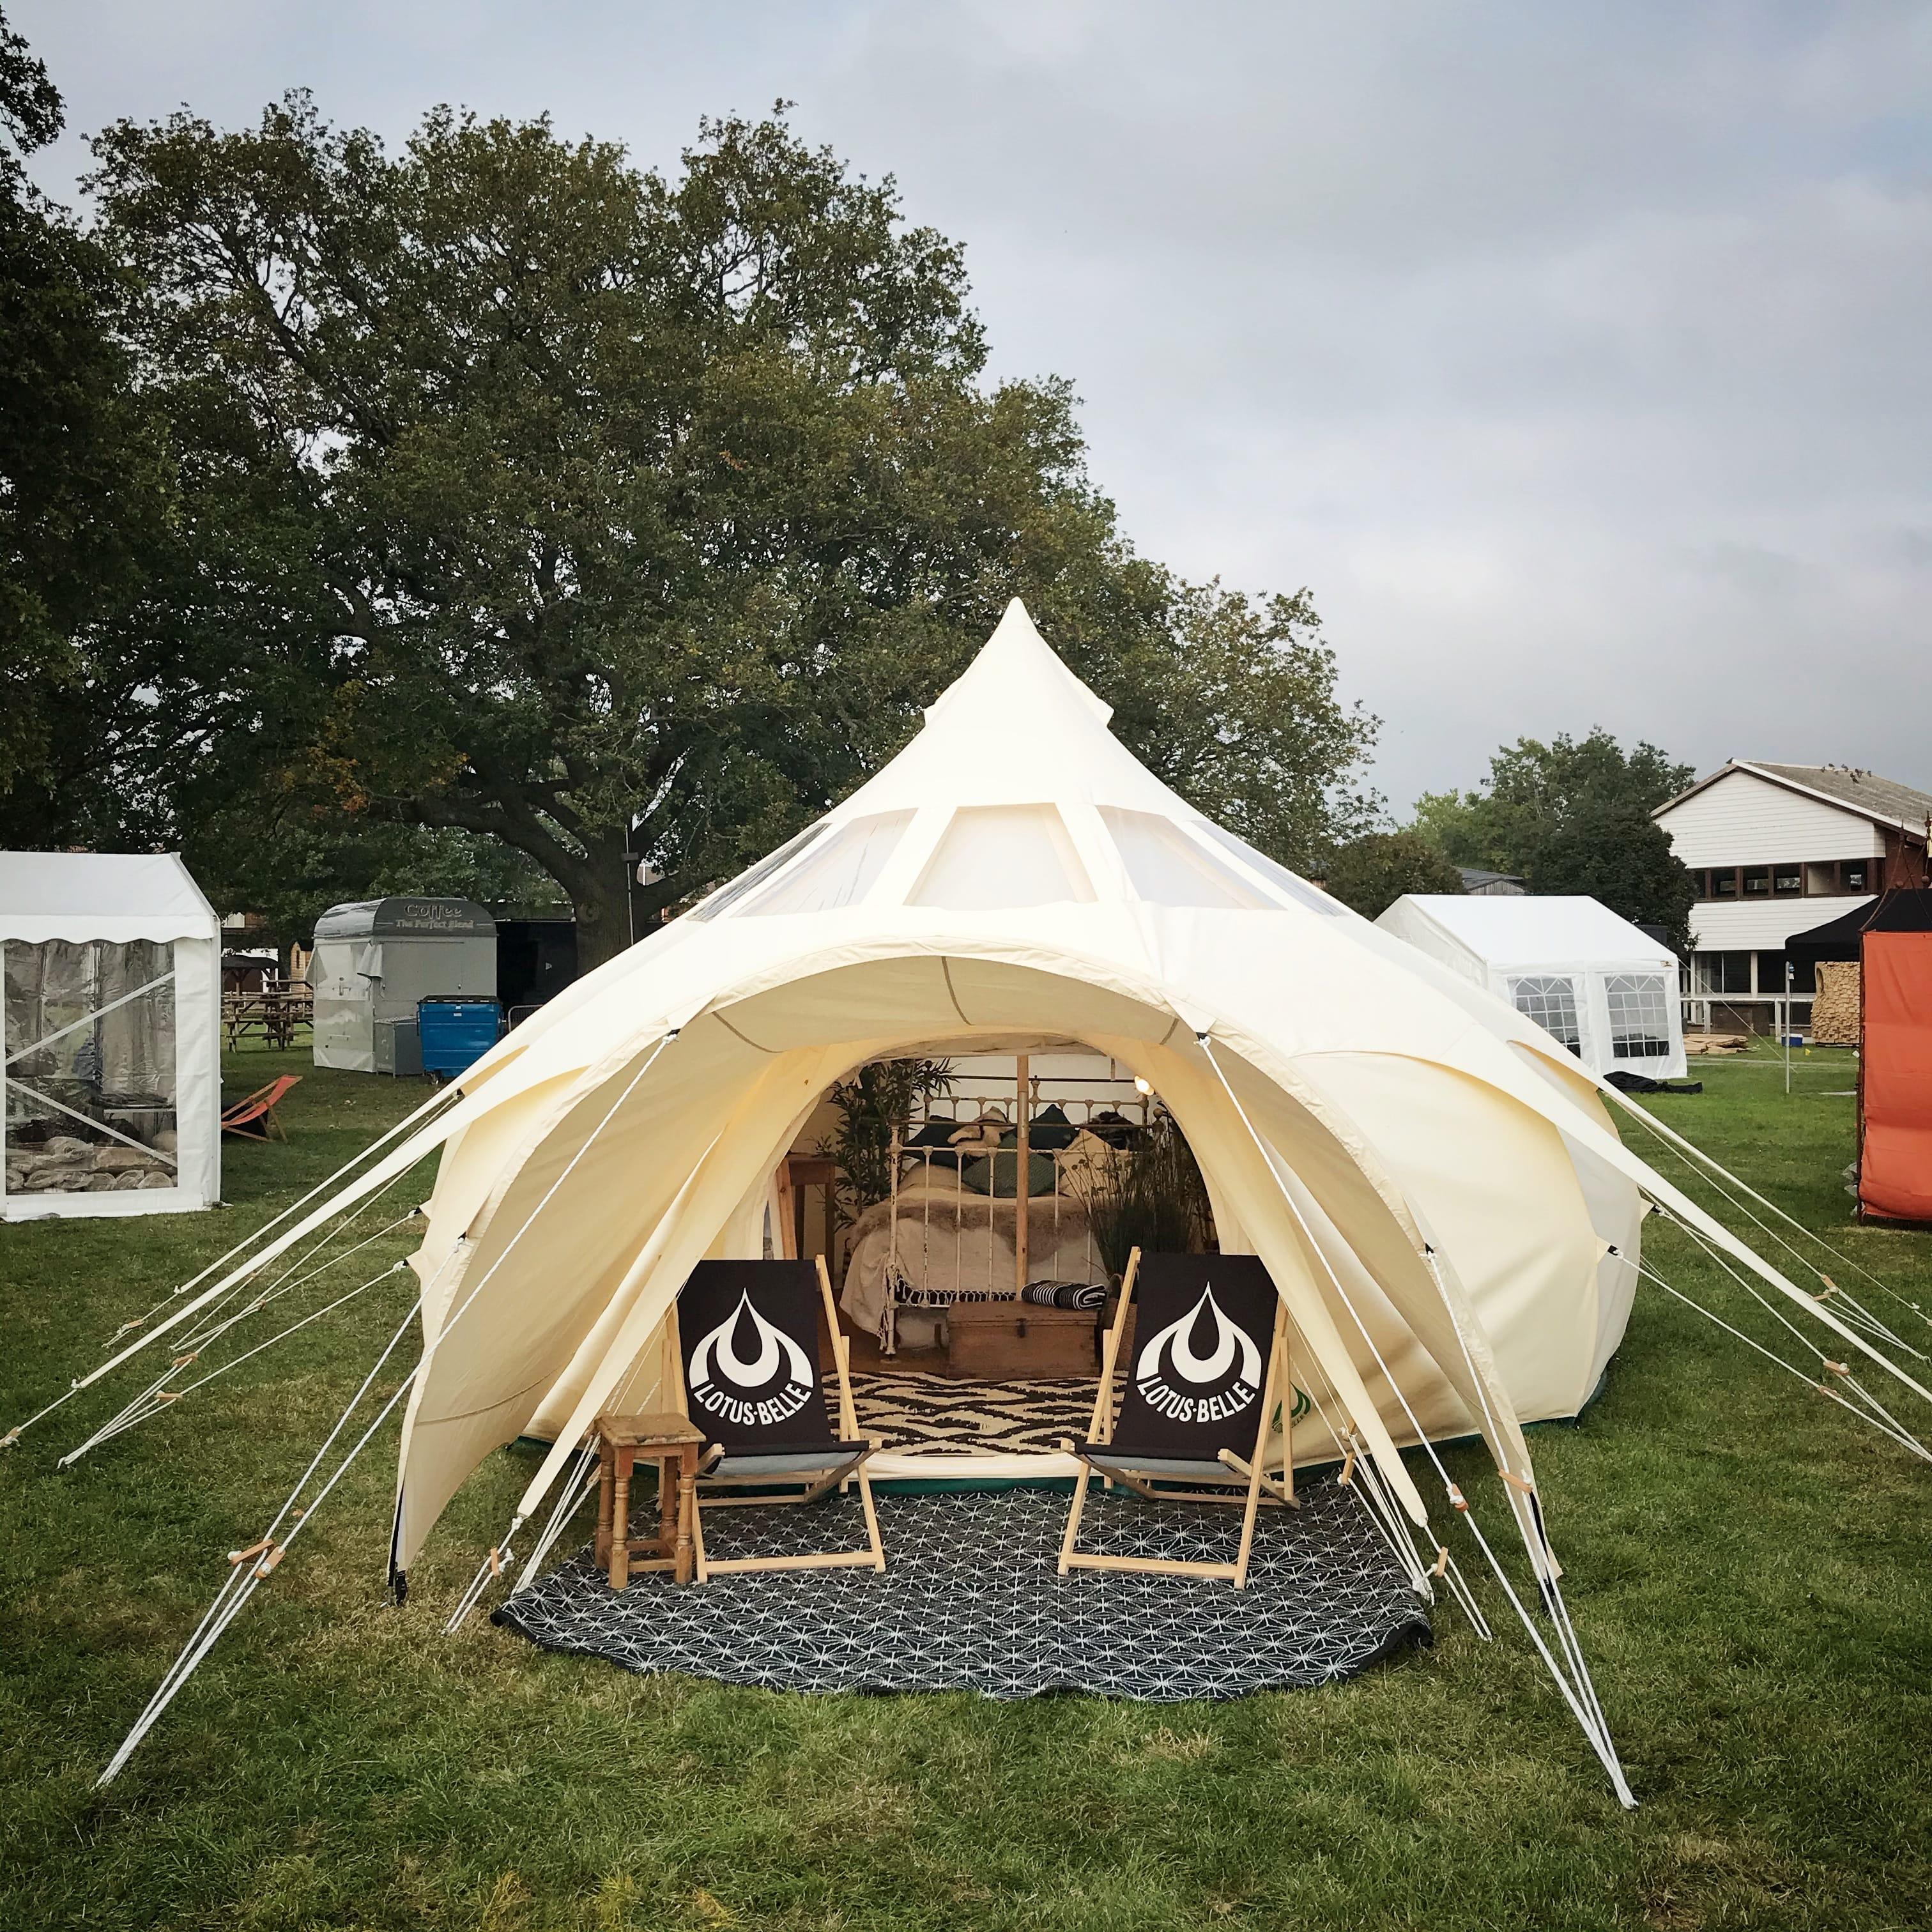 7 blog posts from Glamping Show 2020 speakers you need to read